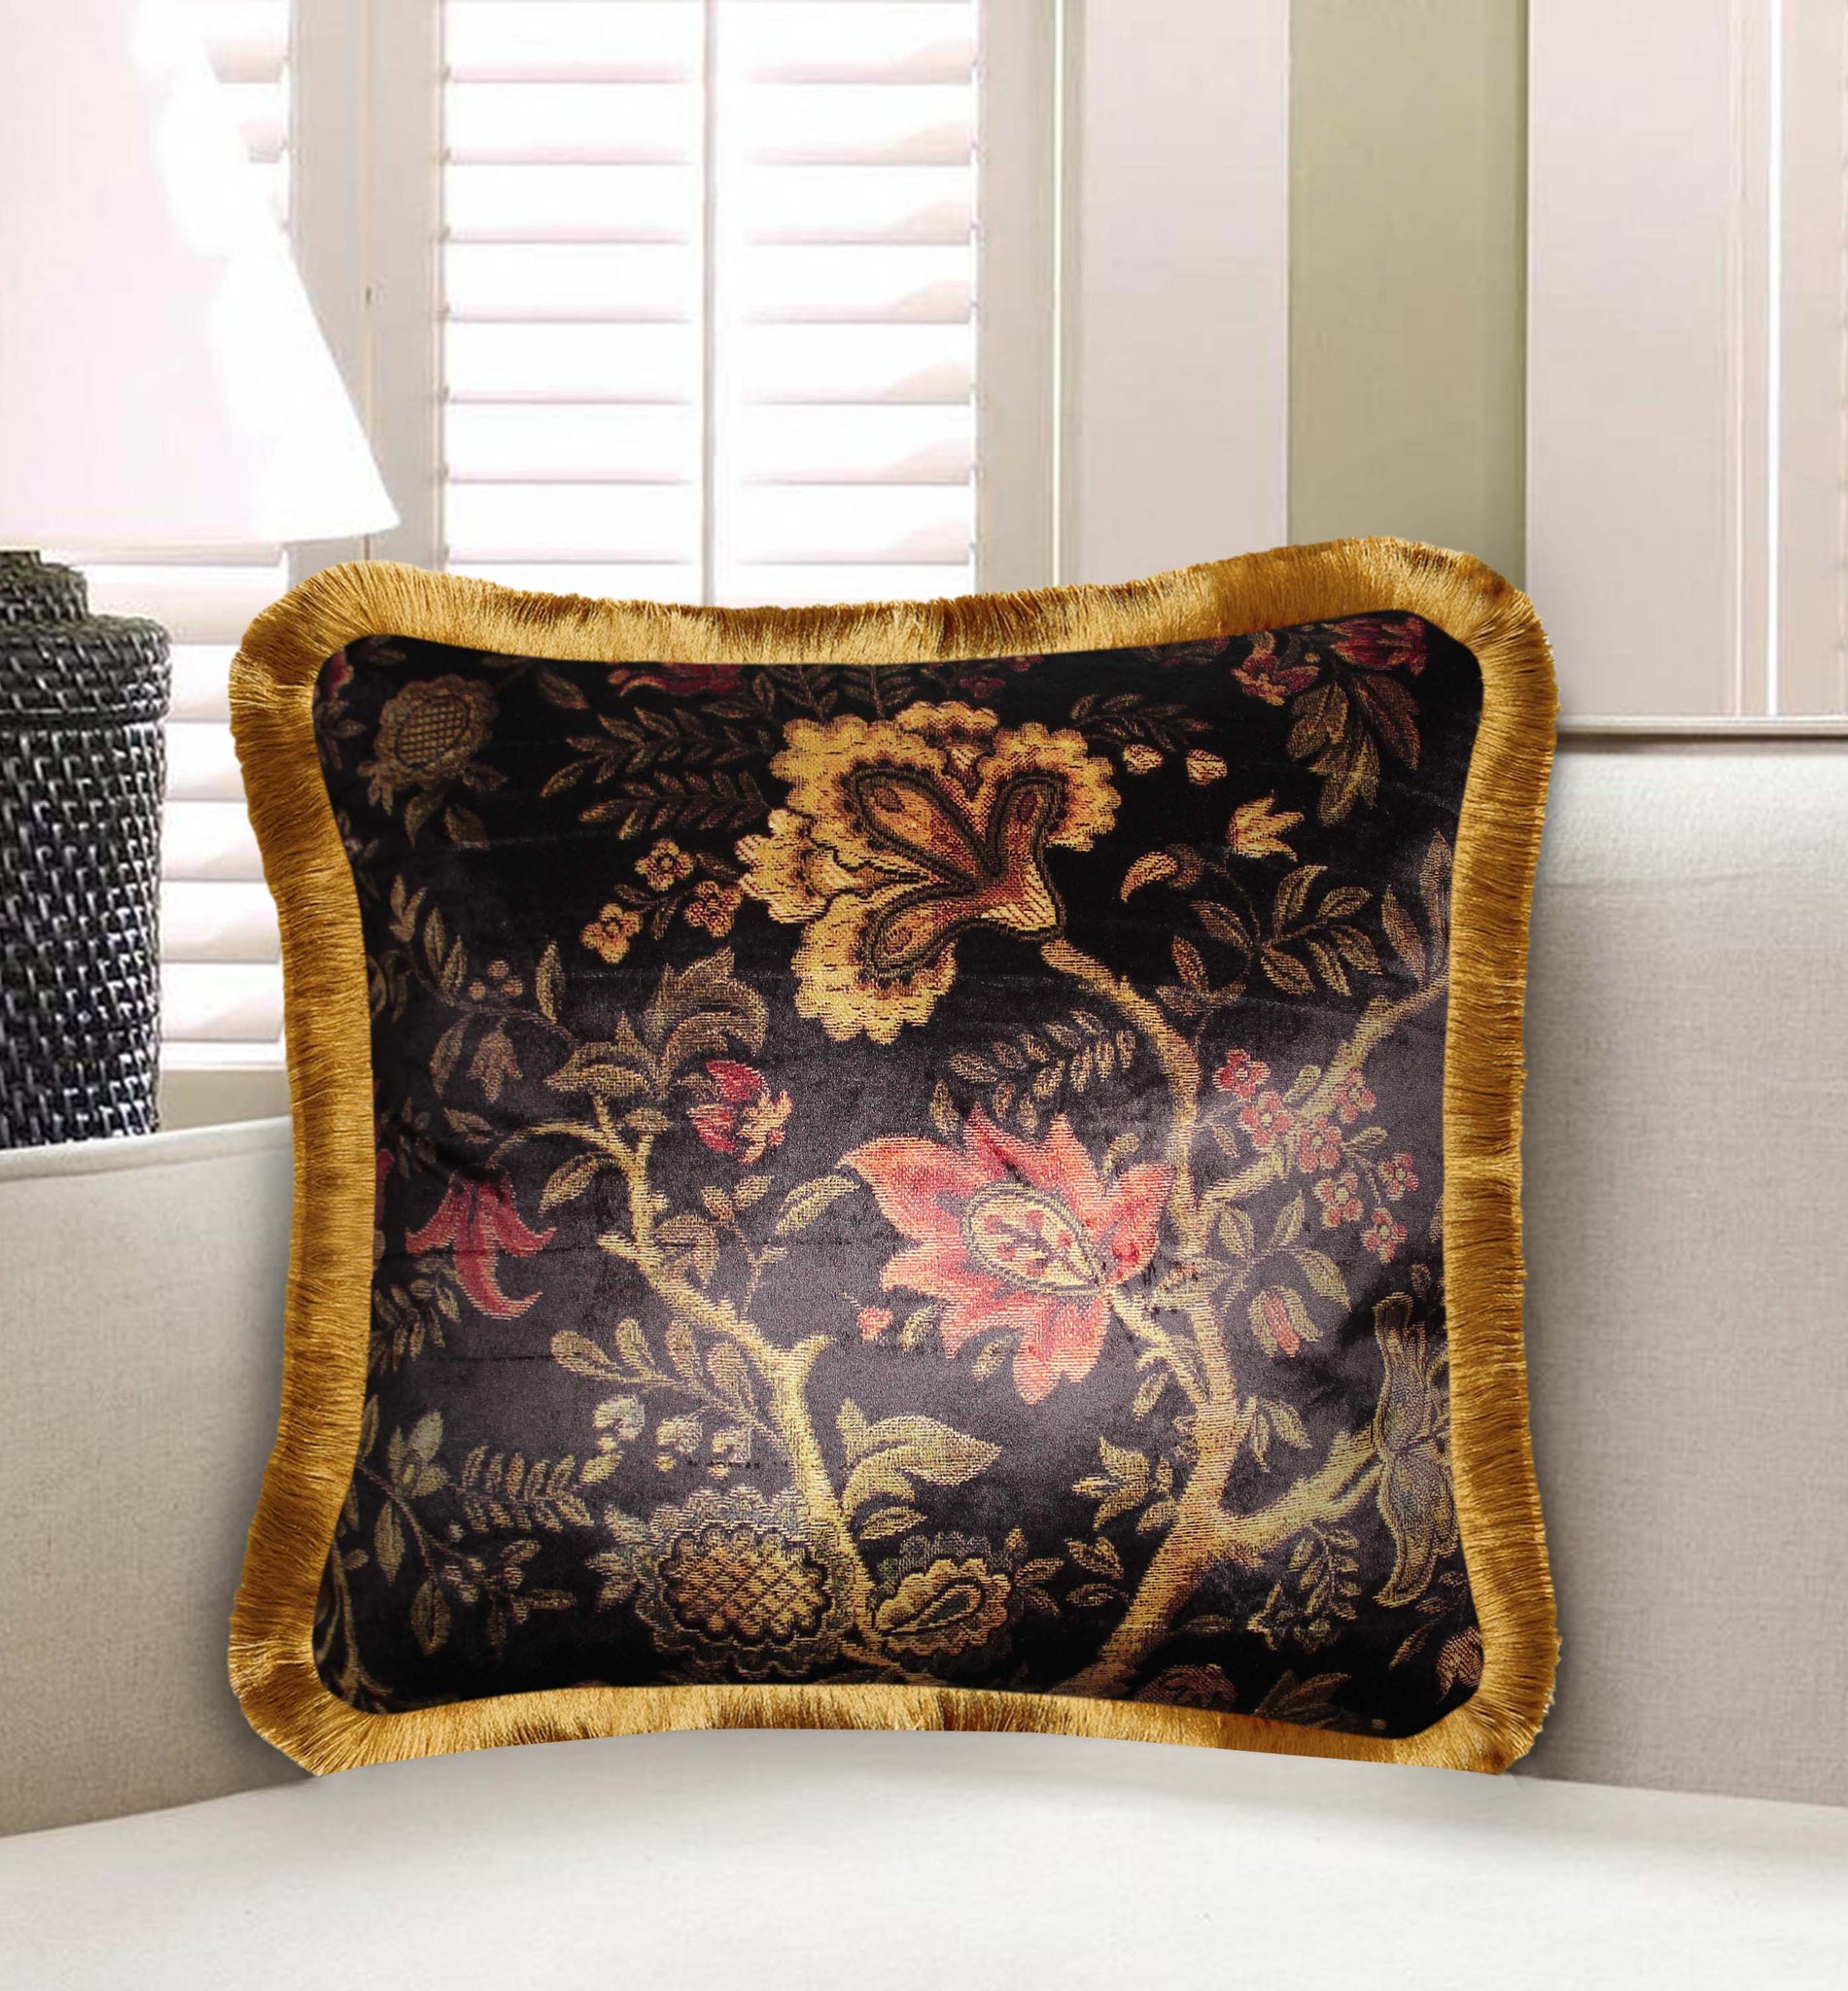 Black Velvet Cushion Cover Antique Floral Decorative Pillow Cover Home Decor Throw Pillow for Sofa Chair Bedroom 45x45 cm 18x18 In